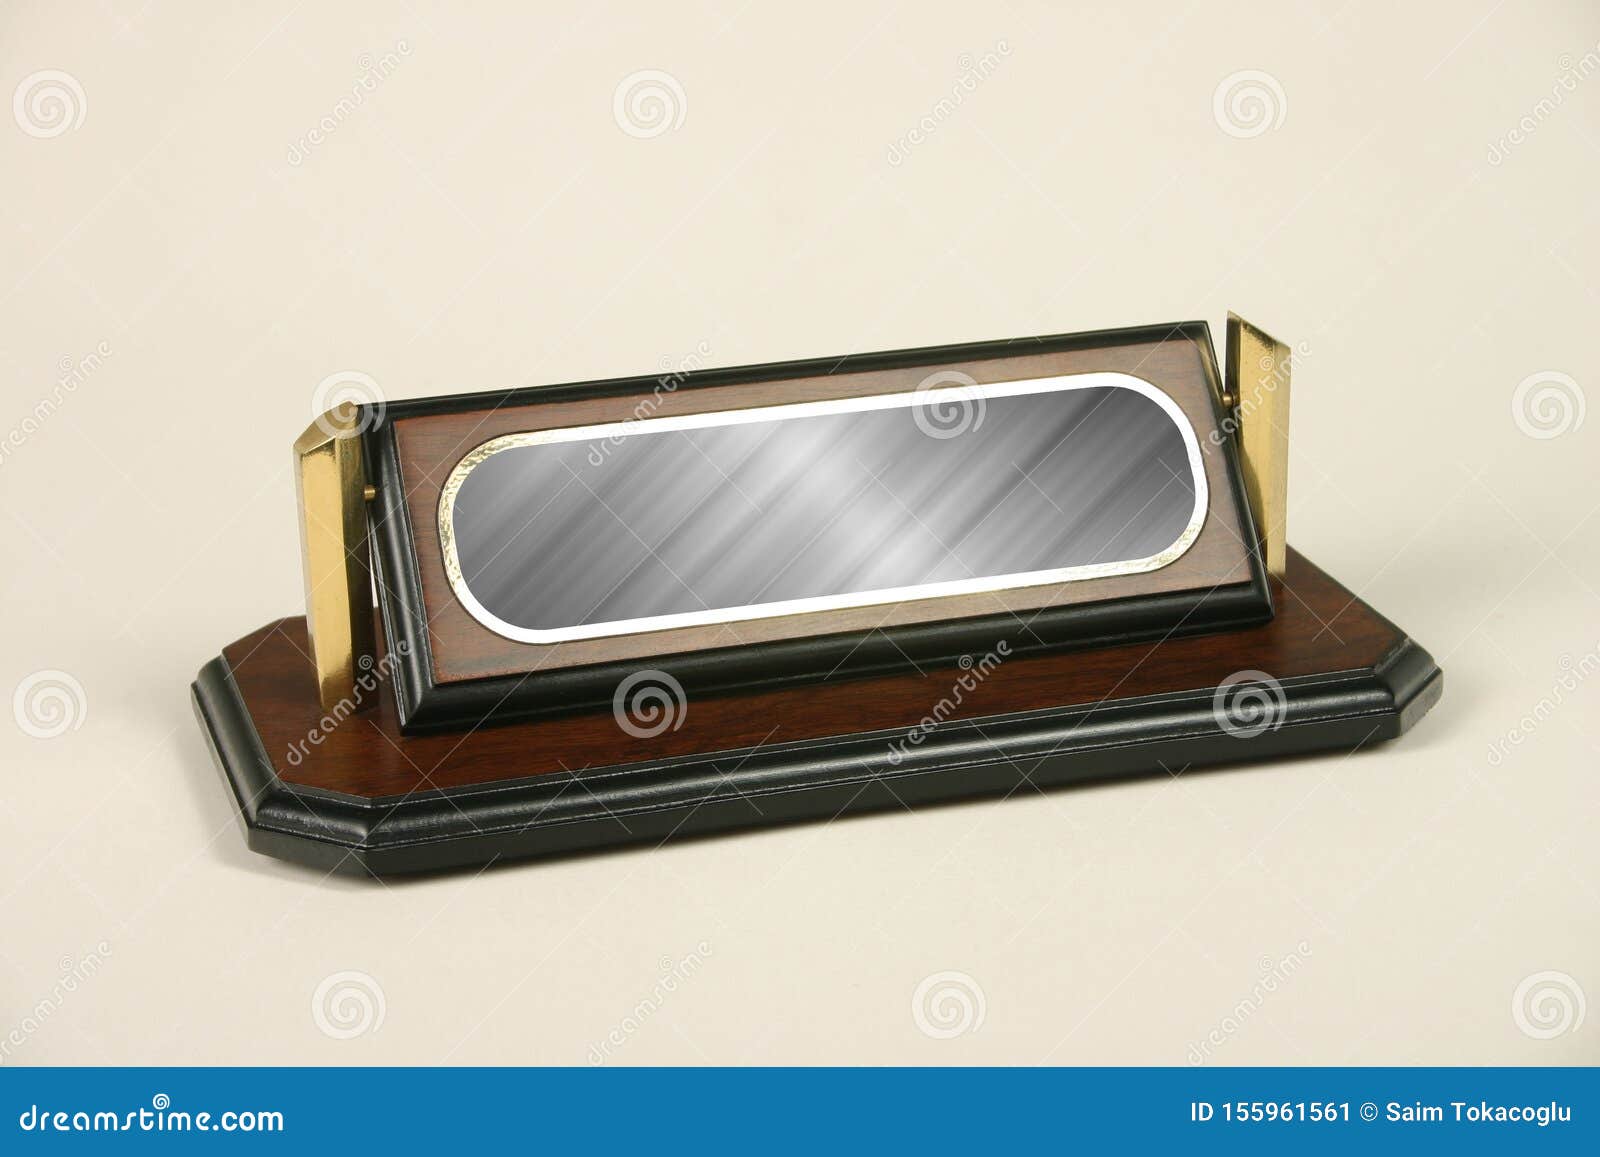 Wooden Base For Writing Name And Title Stock Image Image Of